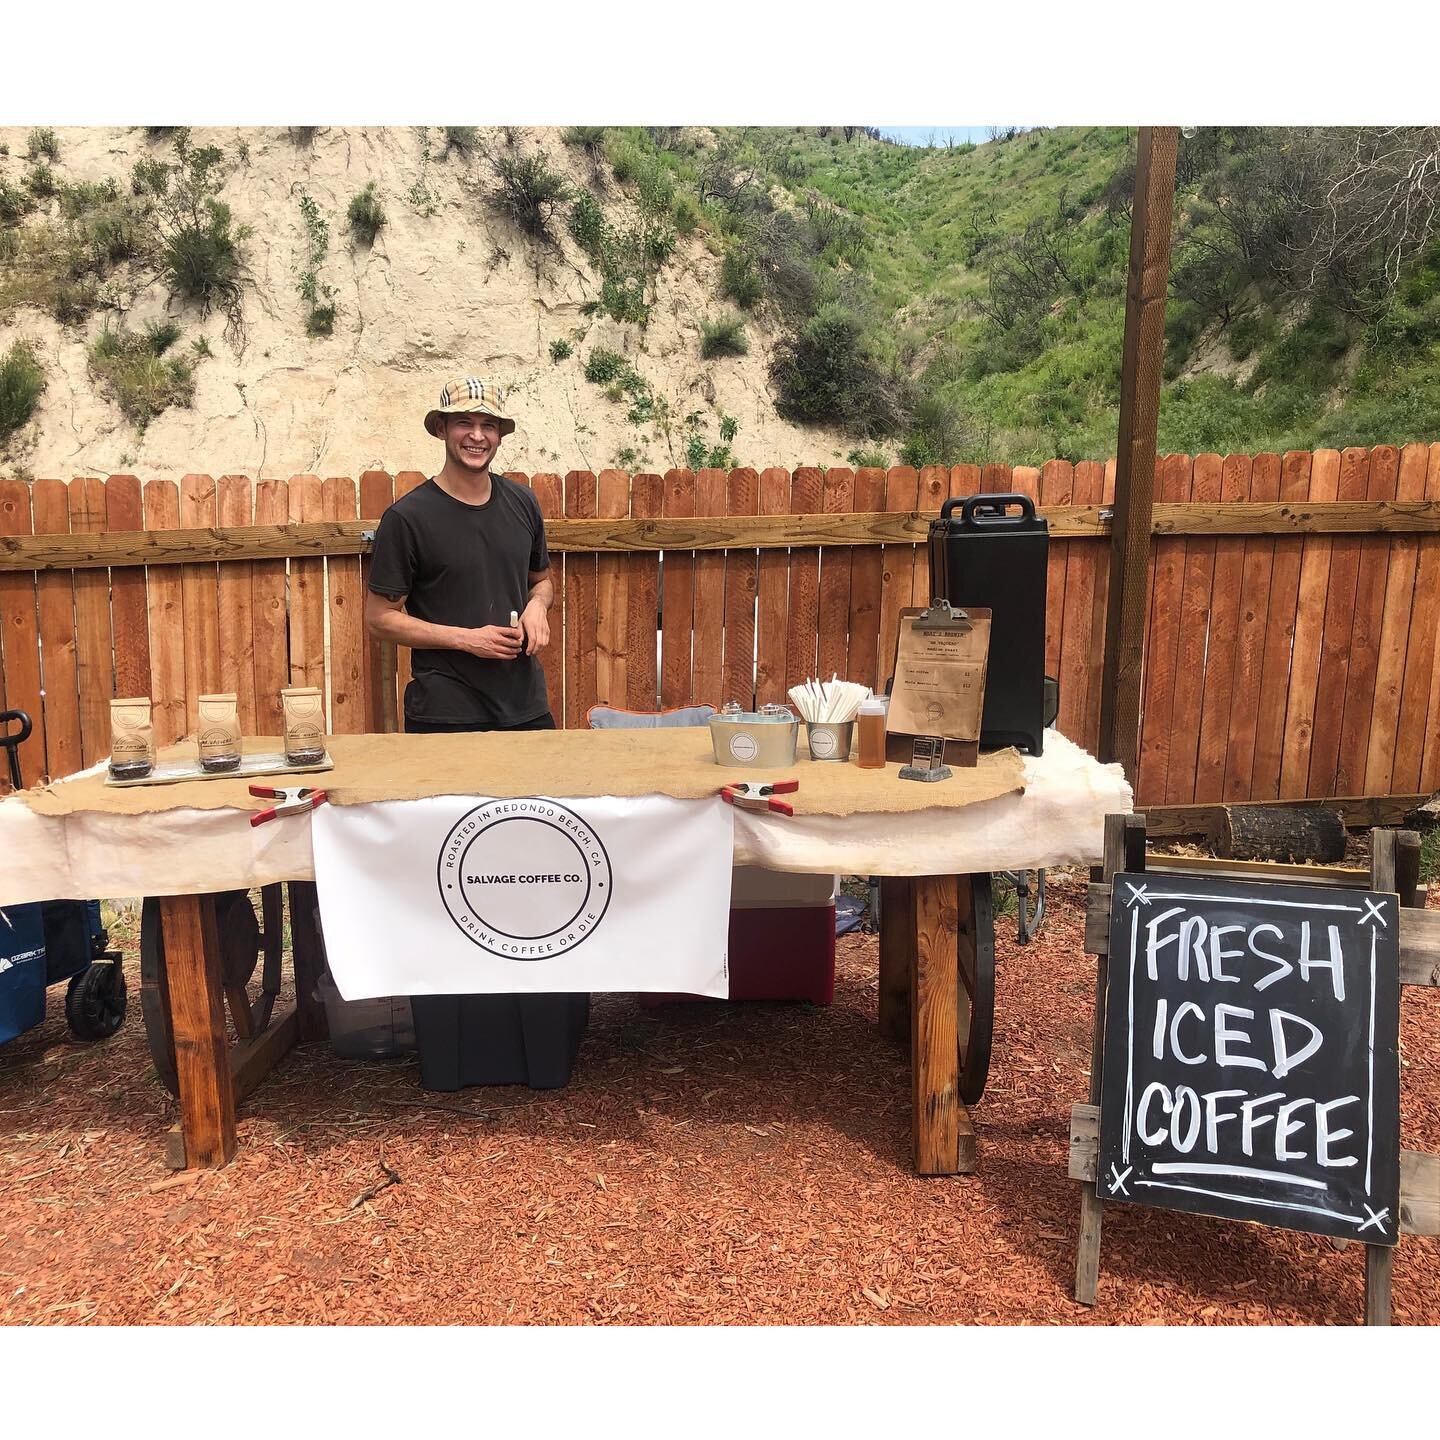 Thank you @wanderforevercollective for a fun event at @reptacular_ranch !! See y&rsquo;all next time!
#salvagecoffeeco #drinkcoffeeordie #coffee #roaster #roastery #smallbatchcoffee #losangeles